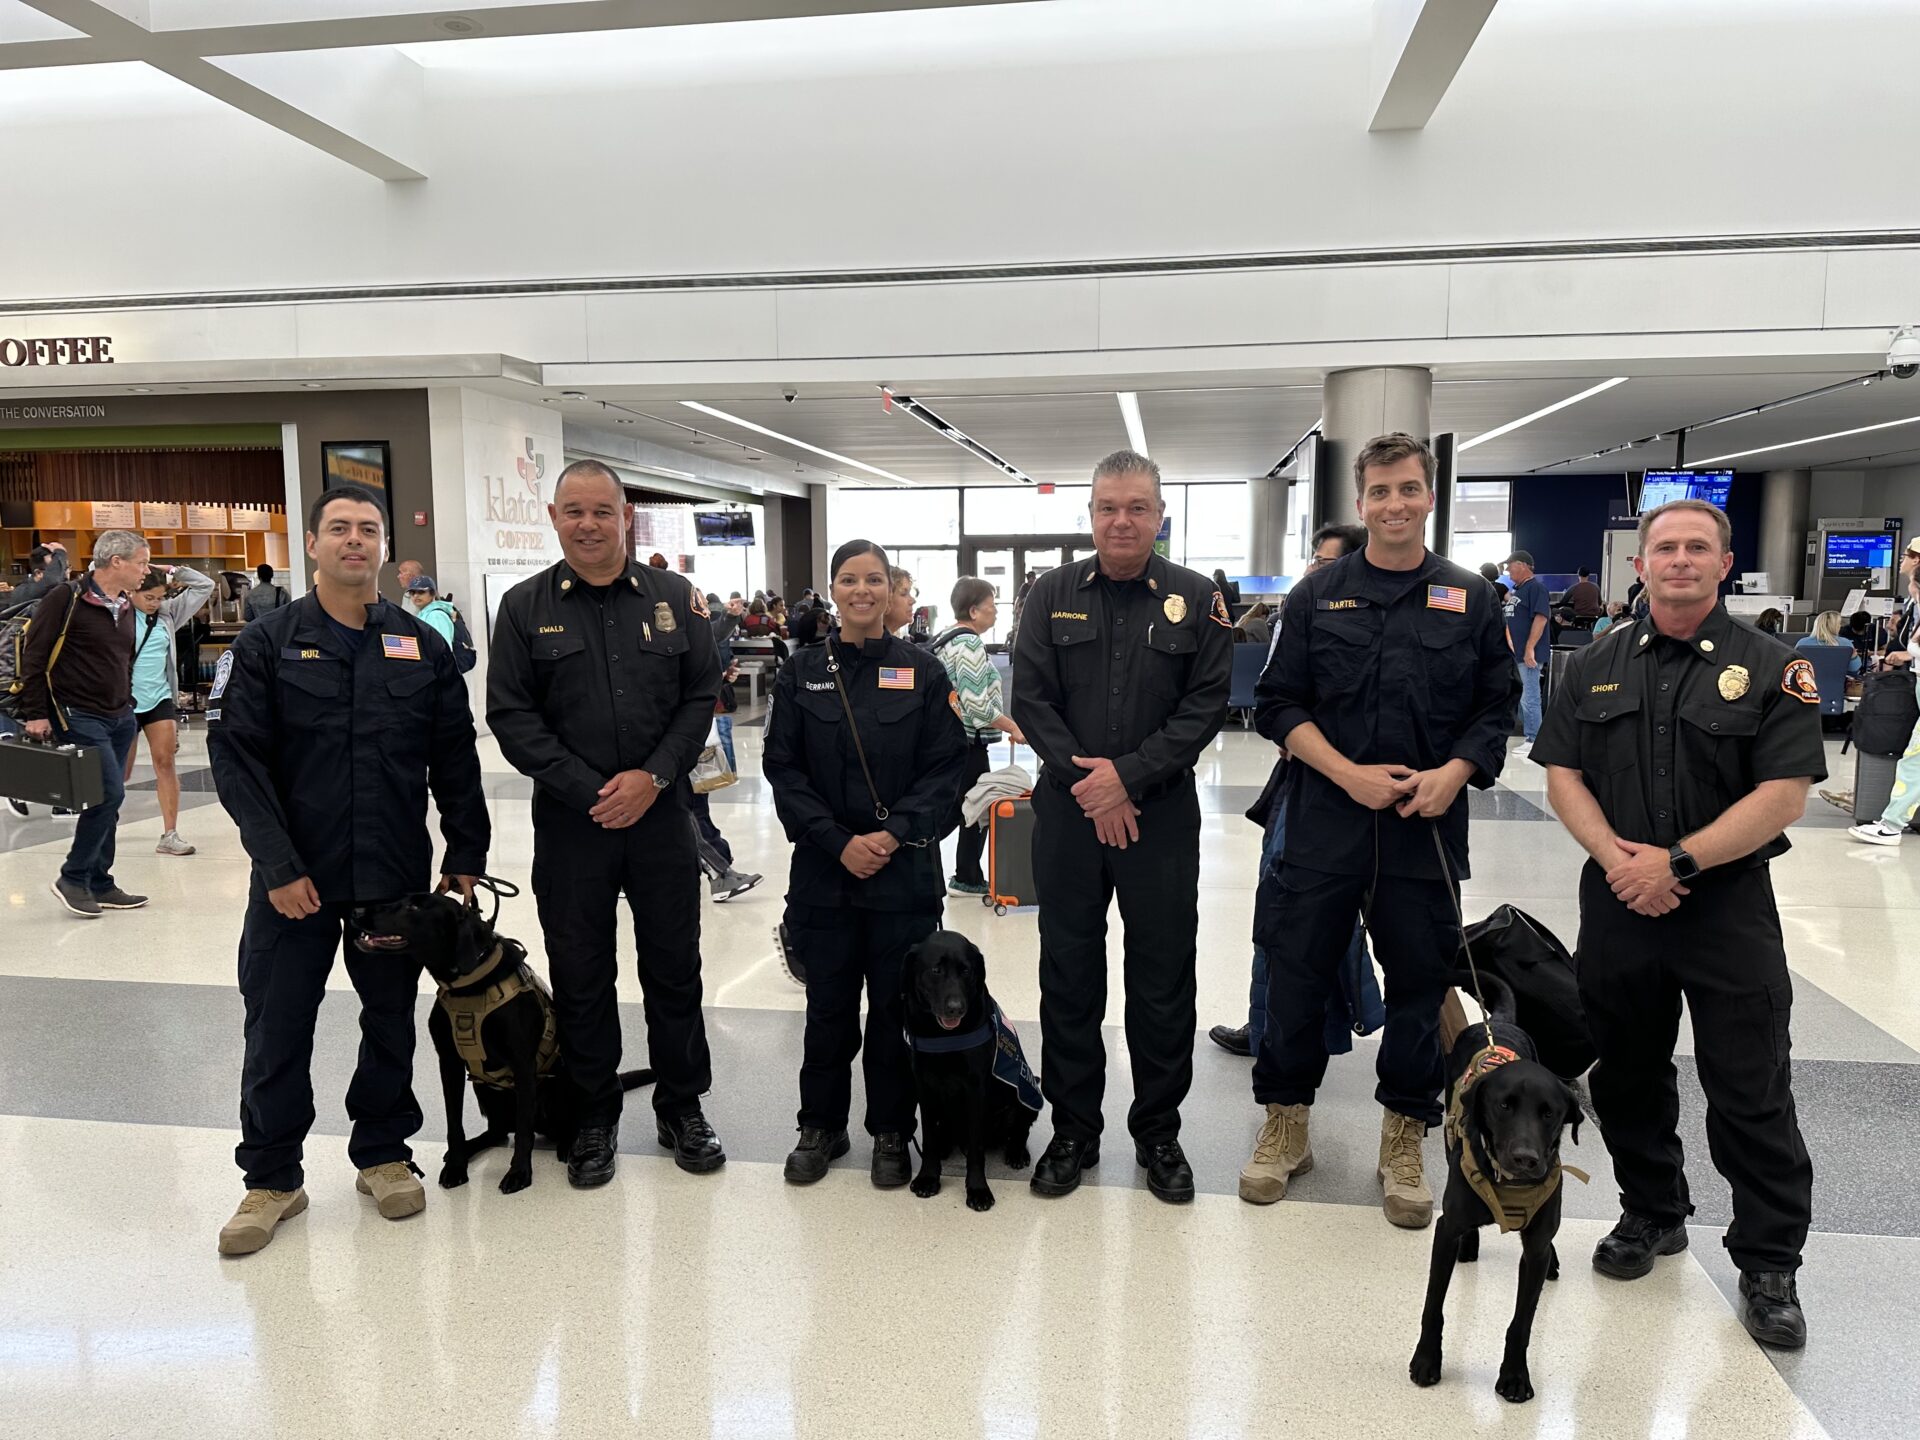 On Saturday, August 12, 2023, the Federal Emergency Management Agency (FEMA) activated the County of Los Angeles Fire Department’s (LACoFD’s) California Task Force 2 (CA-TF2) urban search and rescue (USAR) canine teams for deployment to Maui in the aftermath of the wildfires that impacted the island last week.